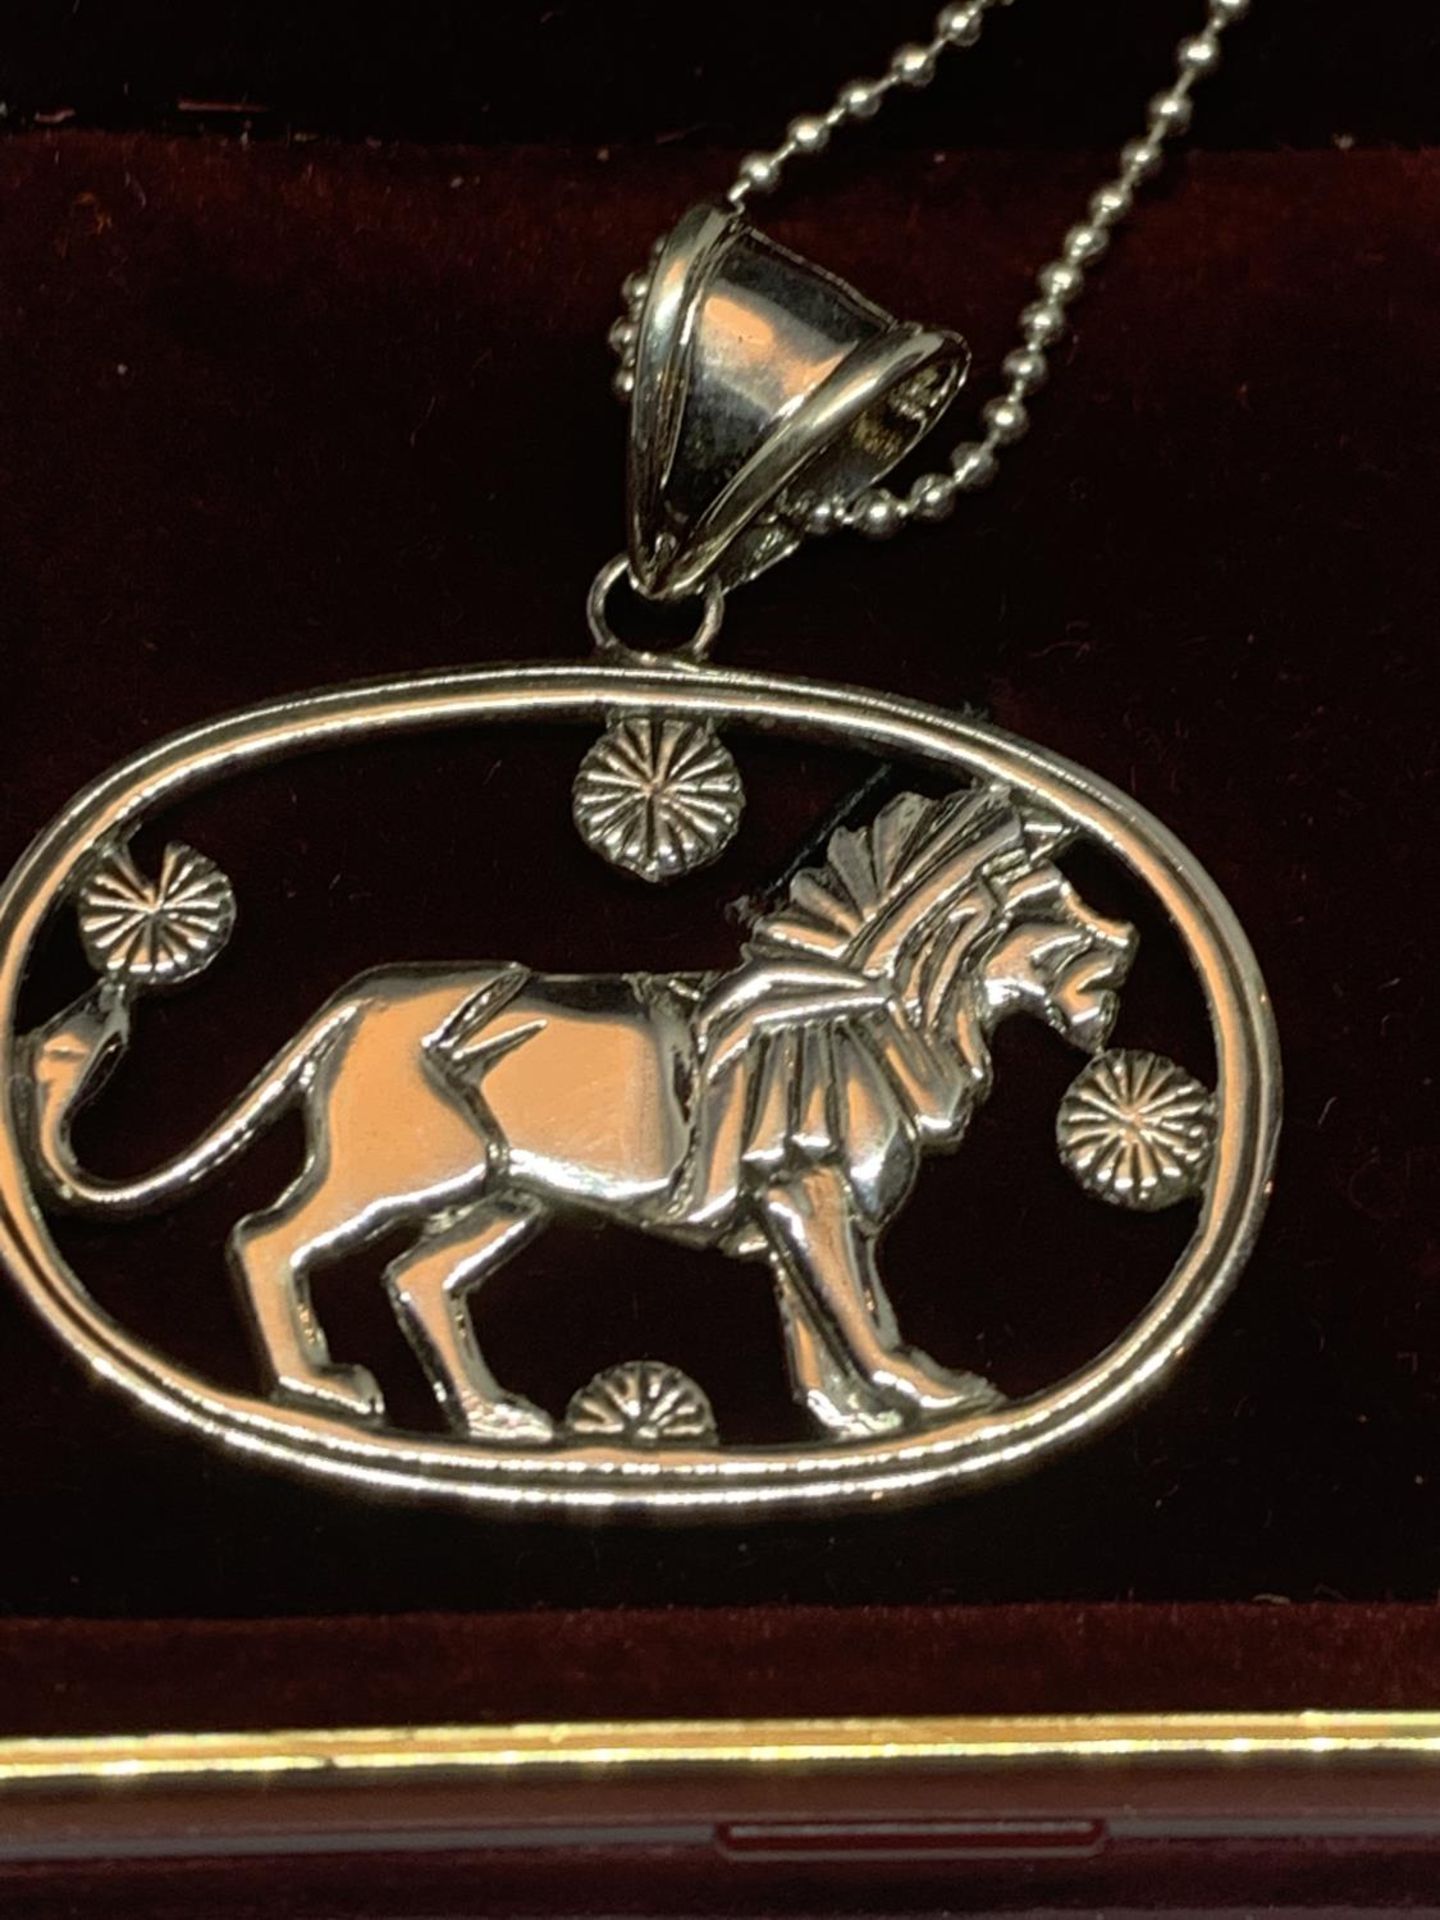 A SILVER NECKLACE WITH A LION PENDANT IN A PRESENTATION BOX - Image 2 of 3